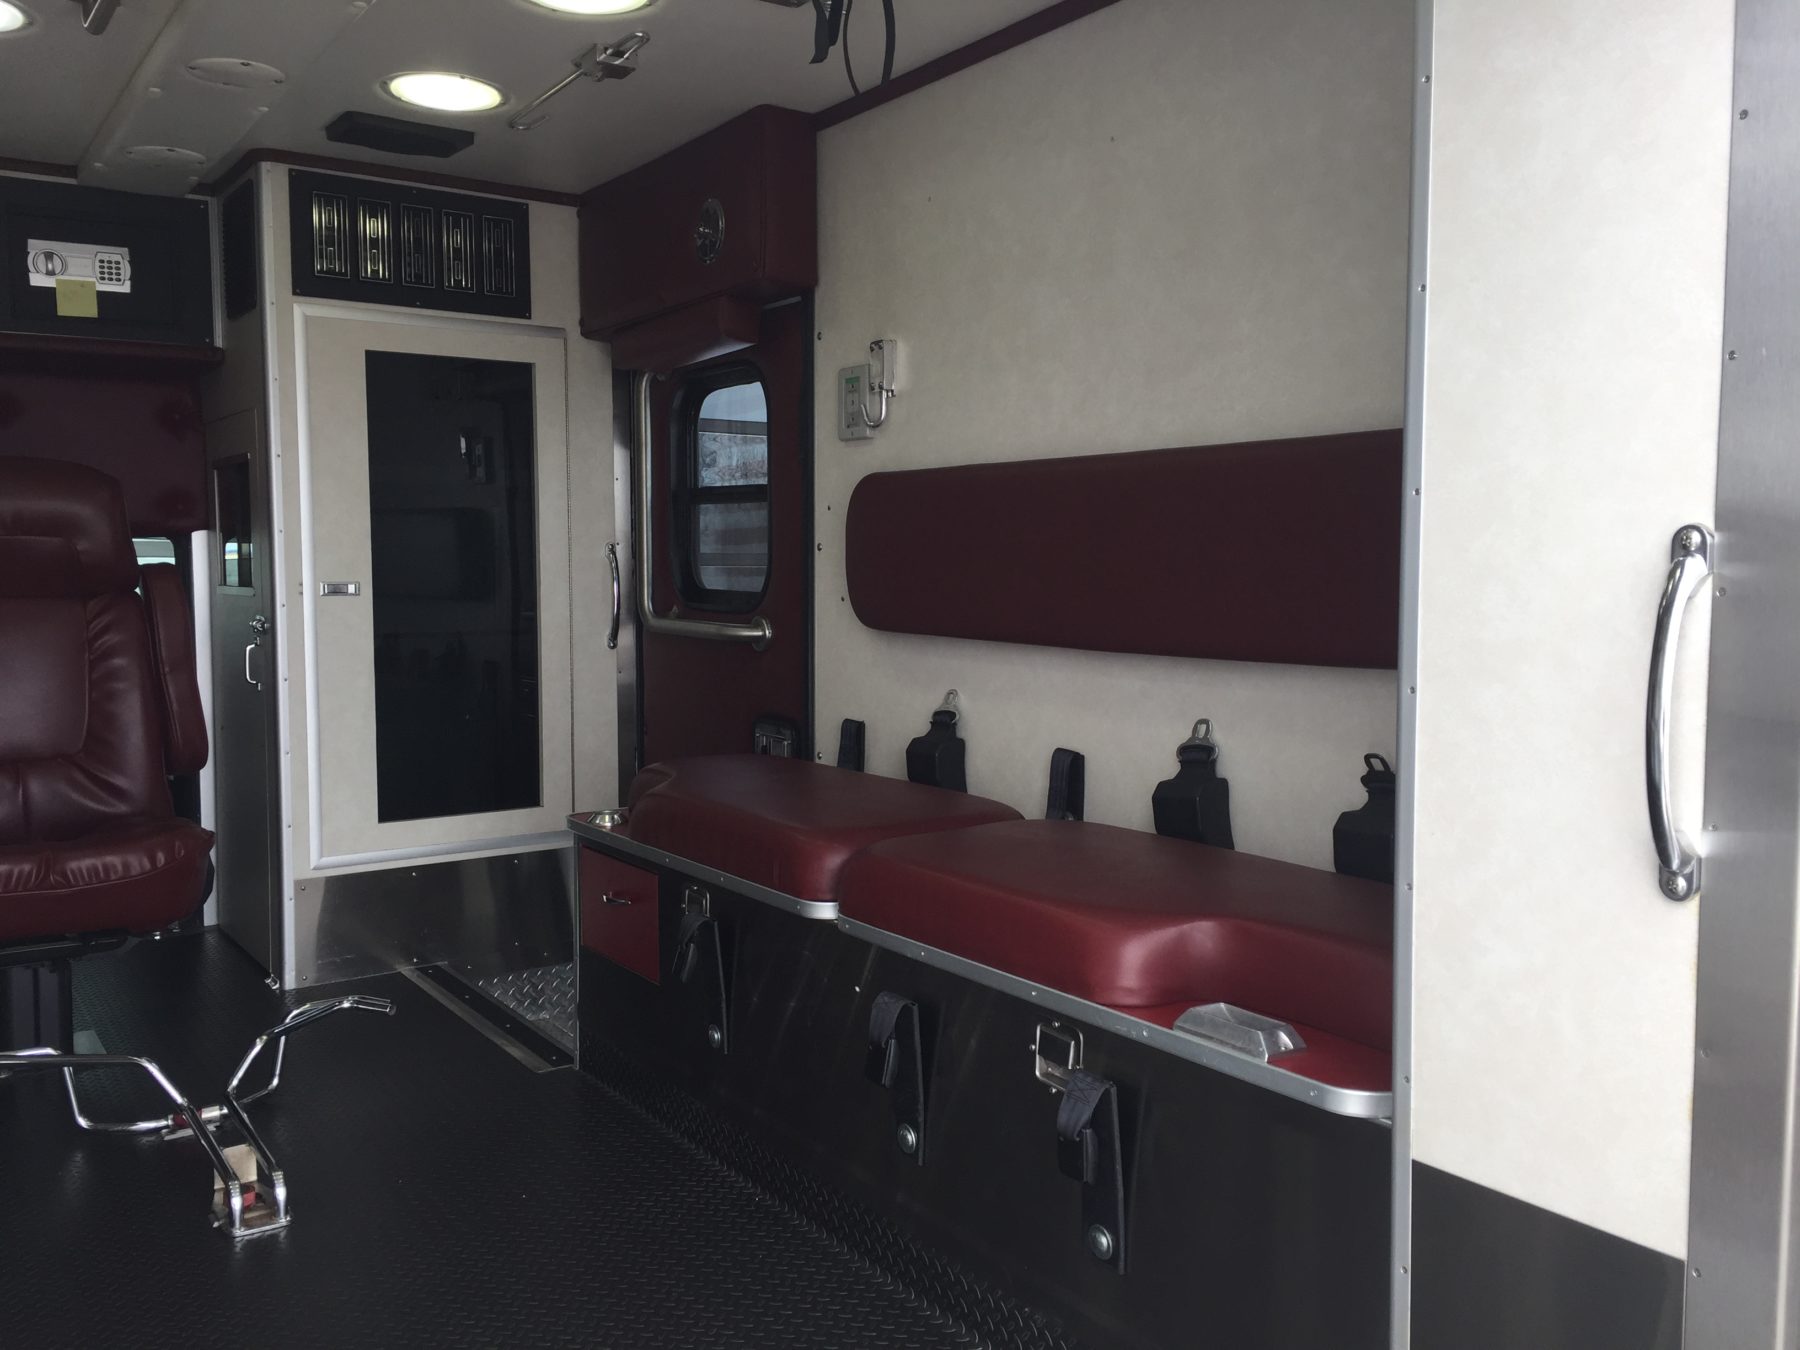 2013 Ford F350 4x4 Type 1 Ambulance For Sale – Picture 15